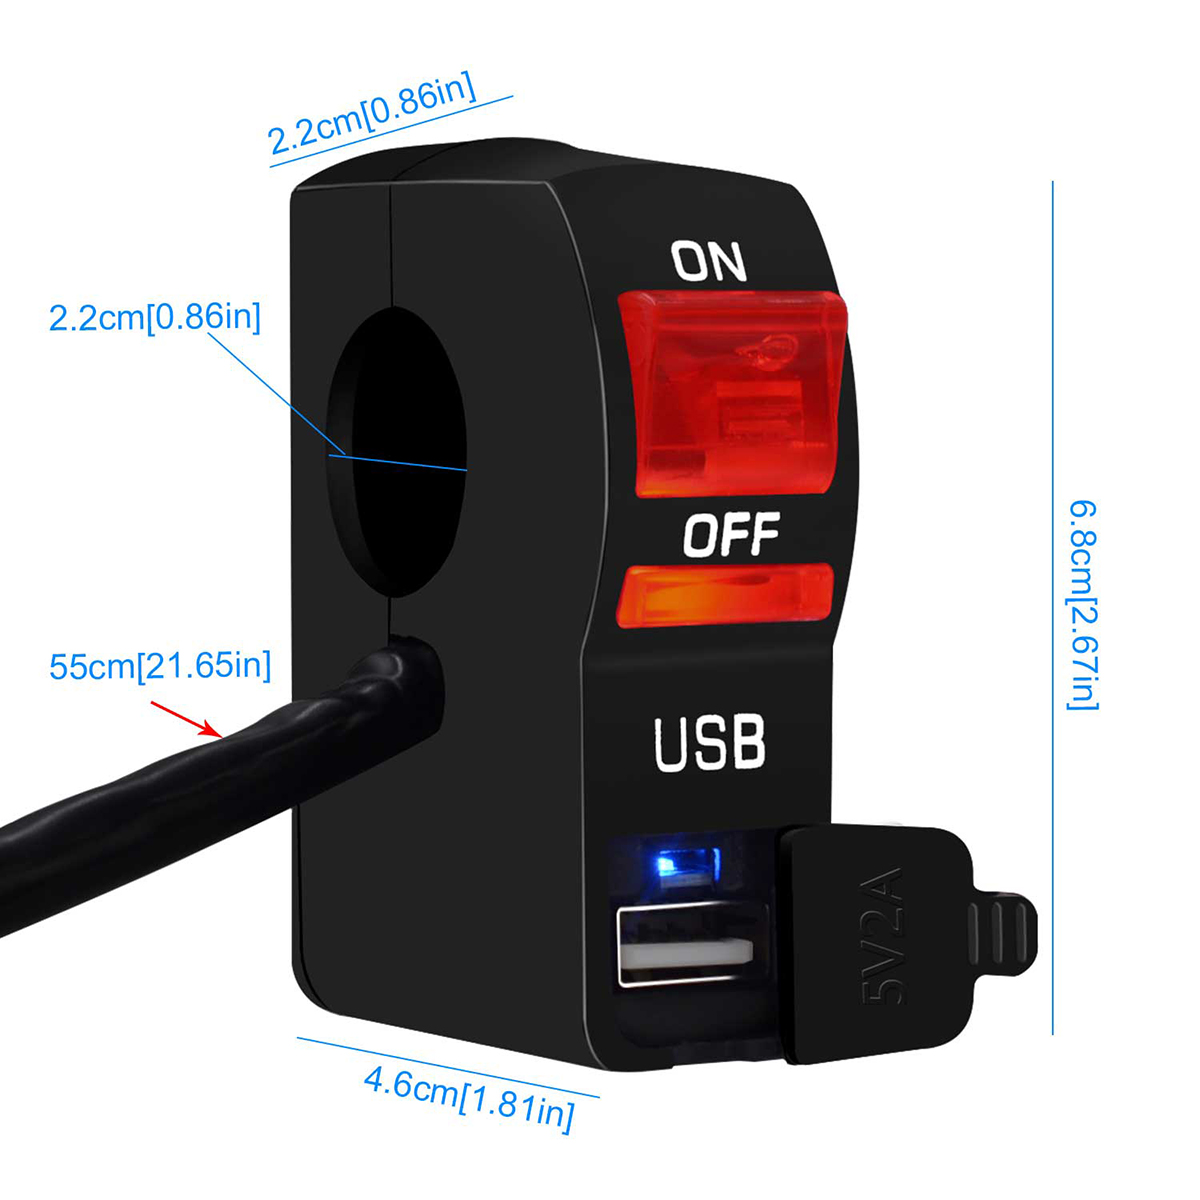 12V universal Waterproof Motorcycle 5V 2A output USB port Charger with Headlight ON/OFF Switch with blue LED Indicator Light